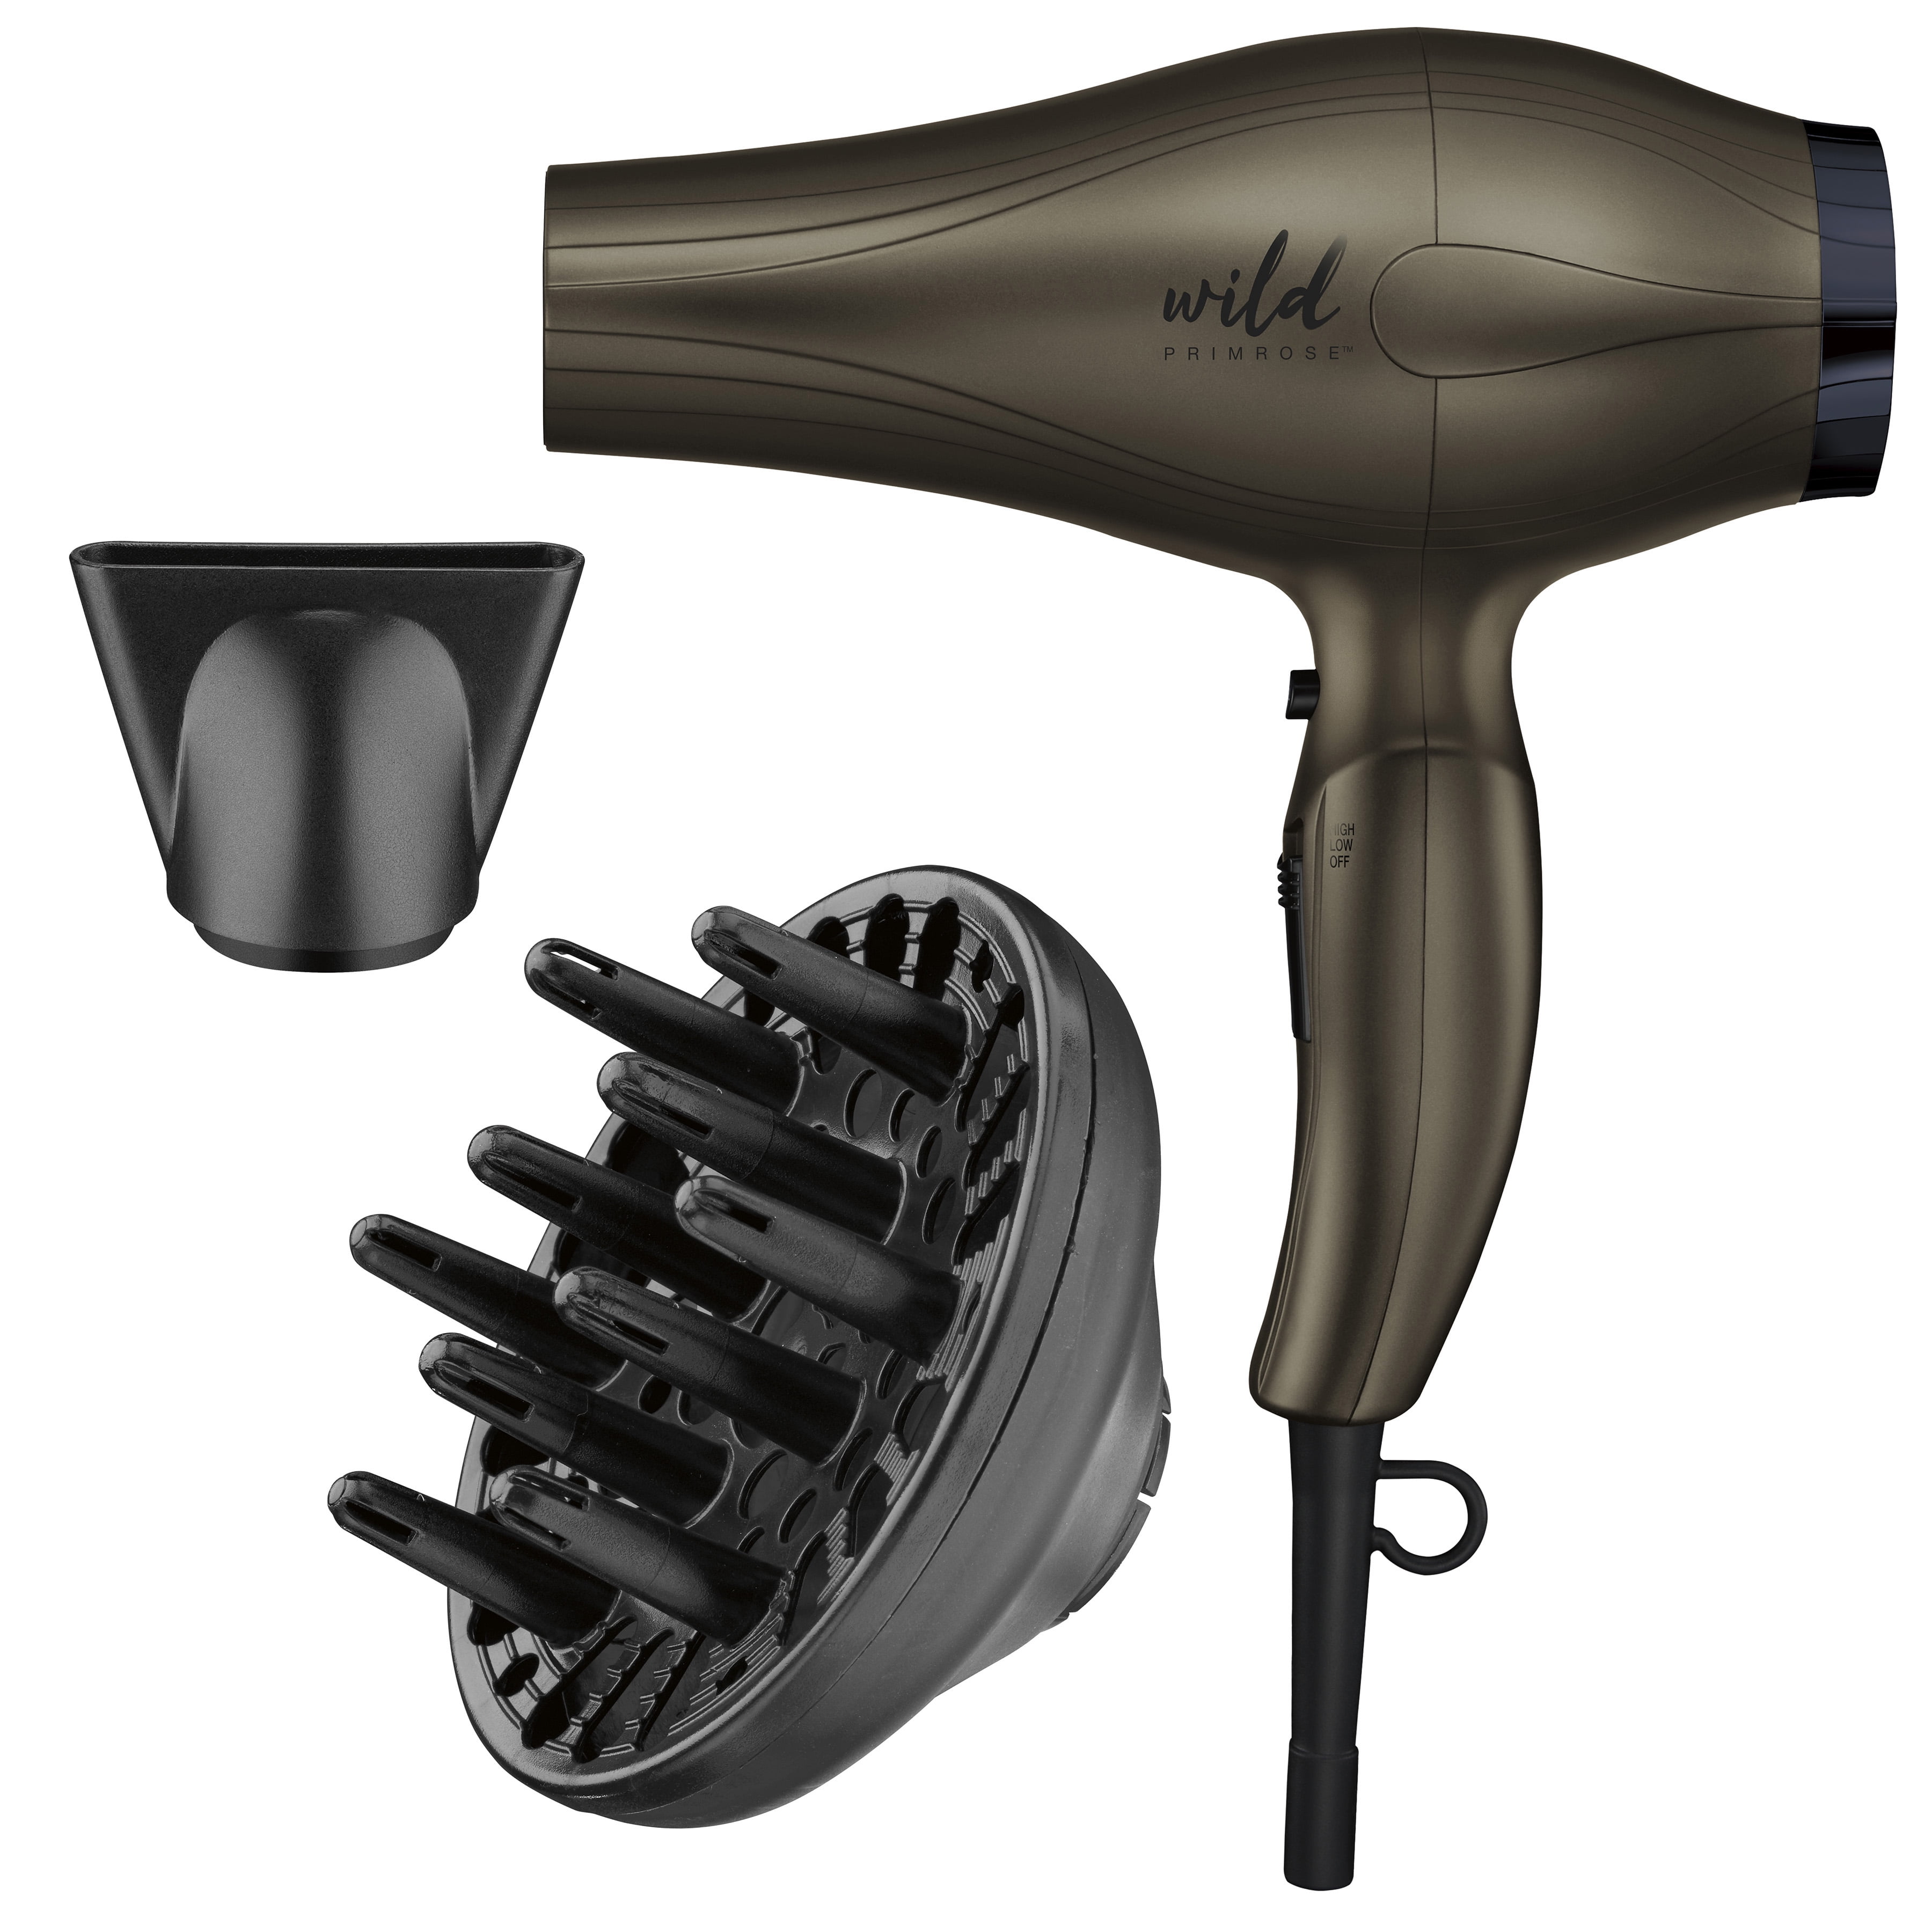 Afrodite  THE WORLDS MOST EXPENSIVE HAIR DRYER  Facebook